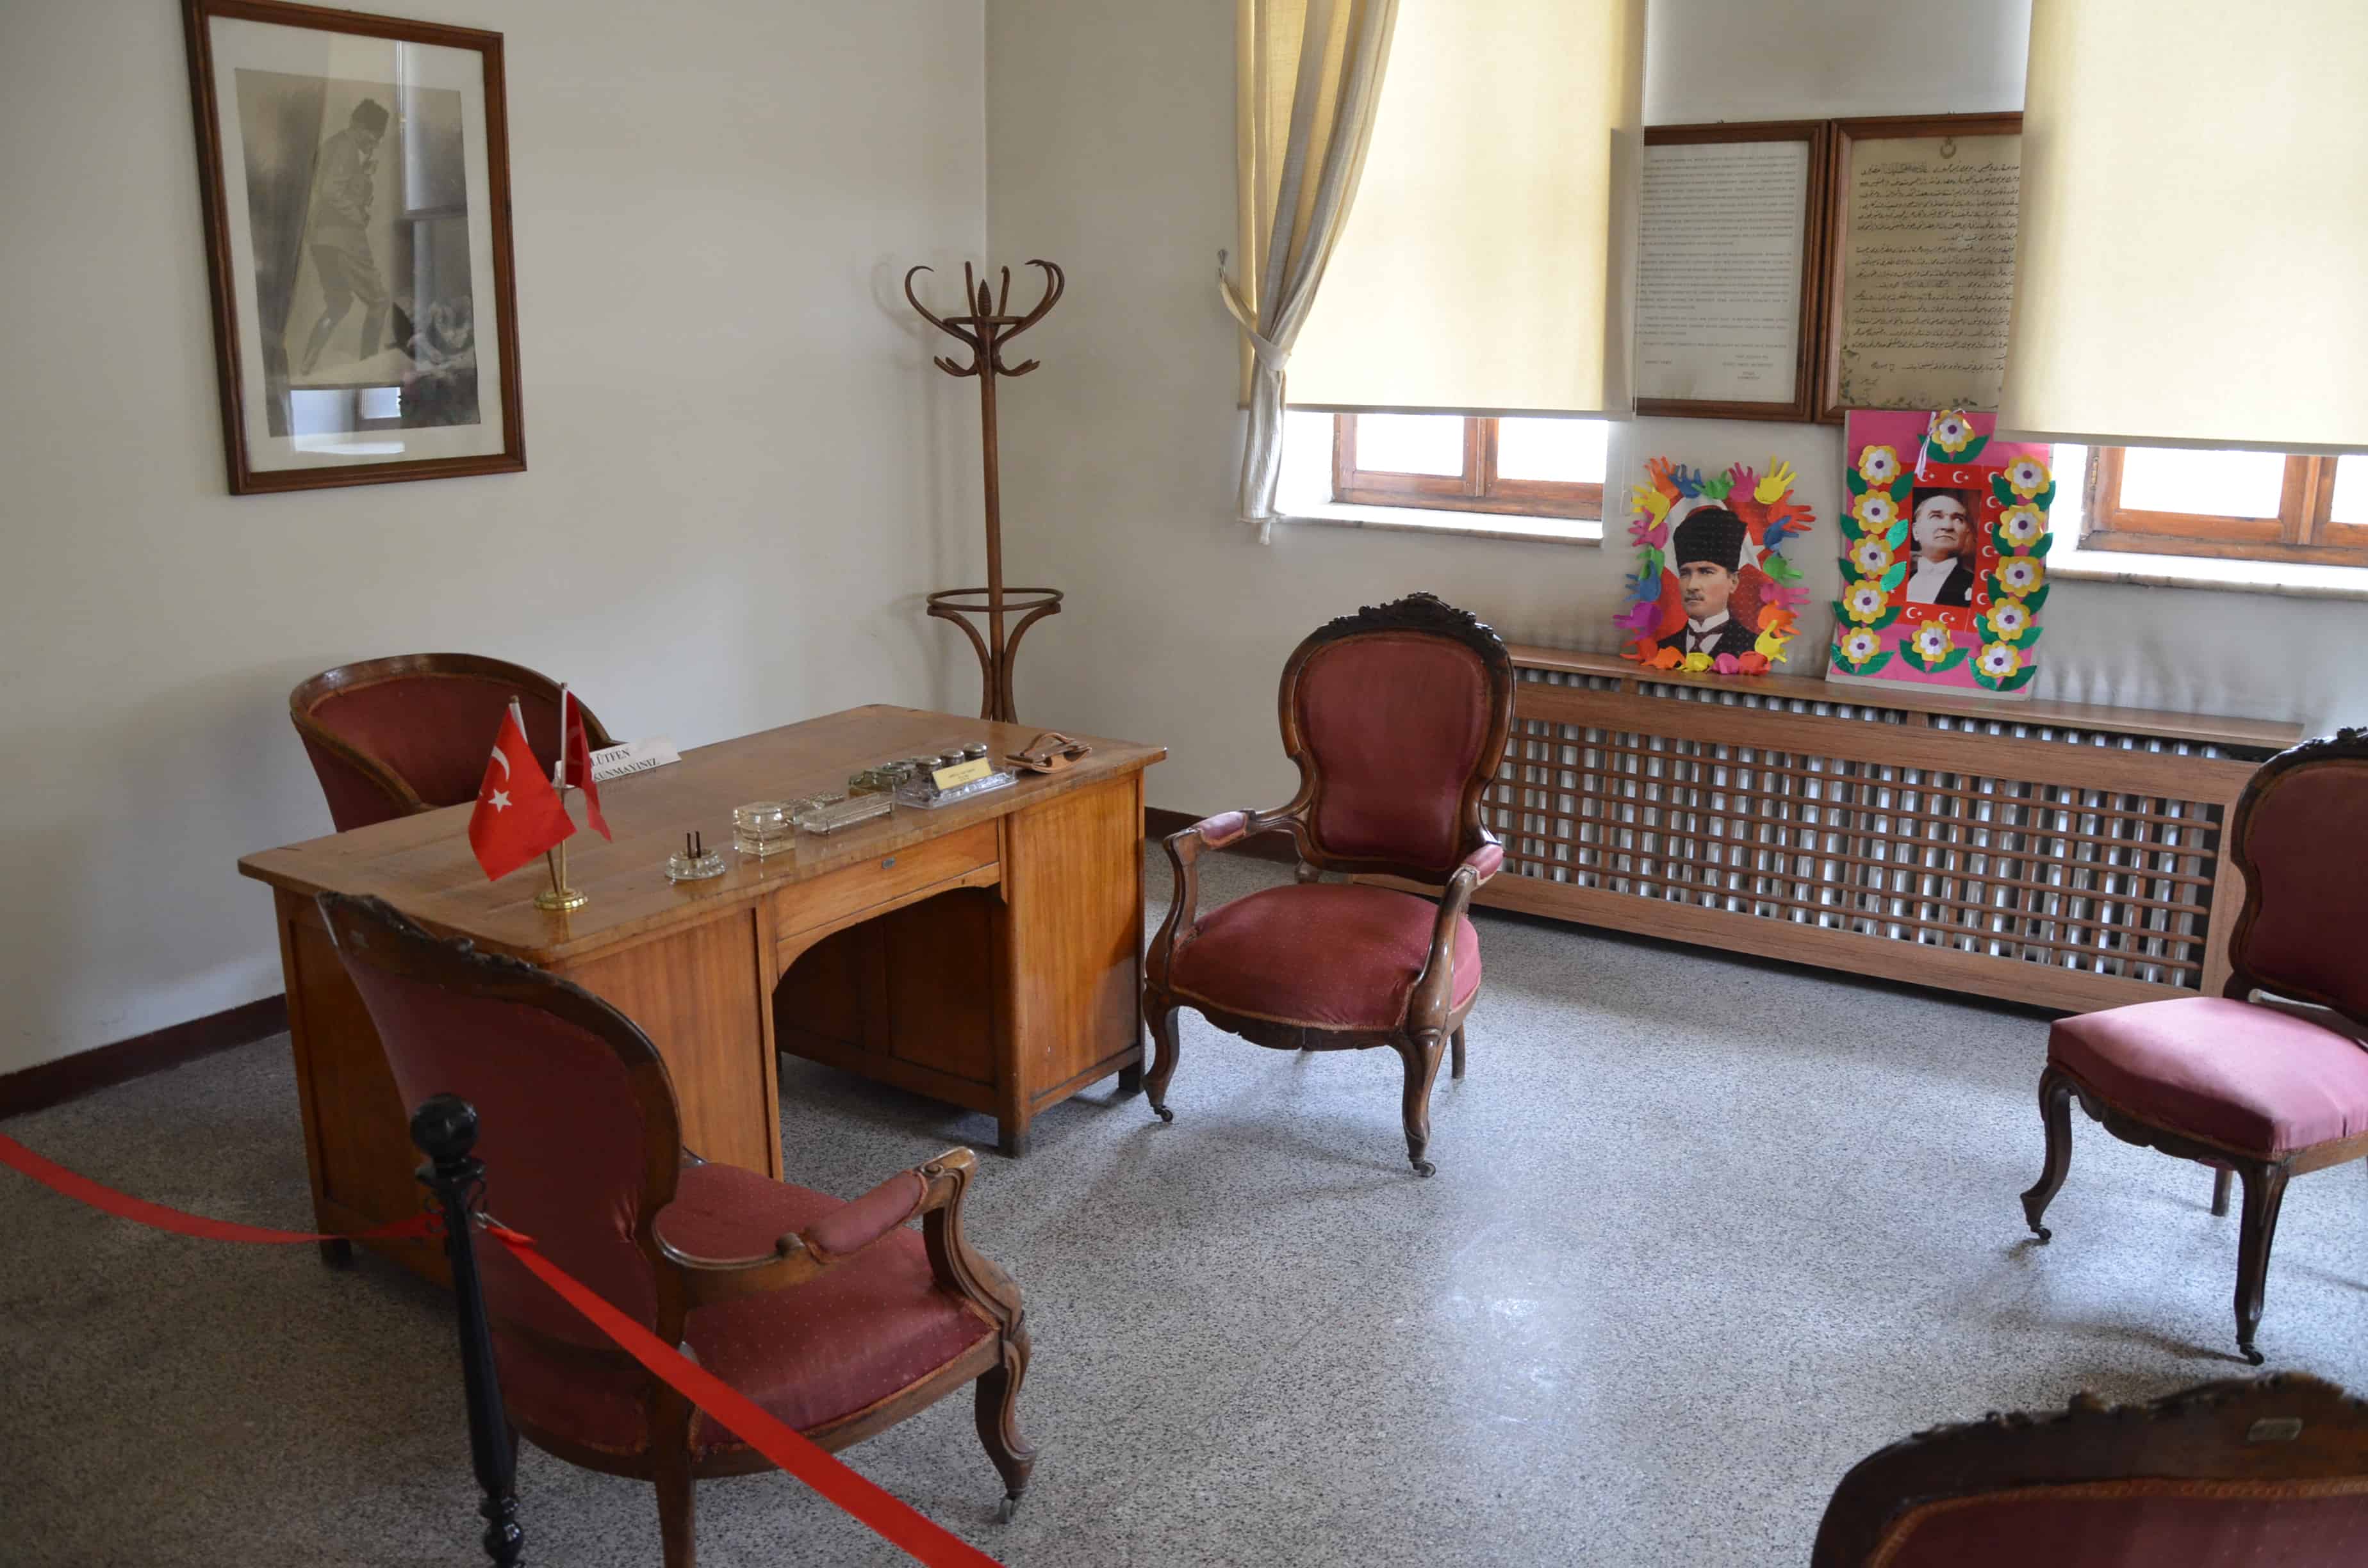 Atatürk's office at the Victory Museum